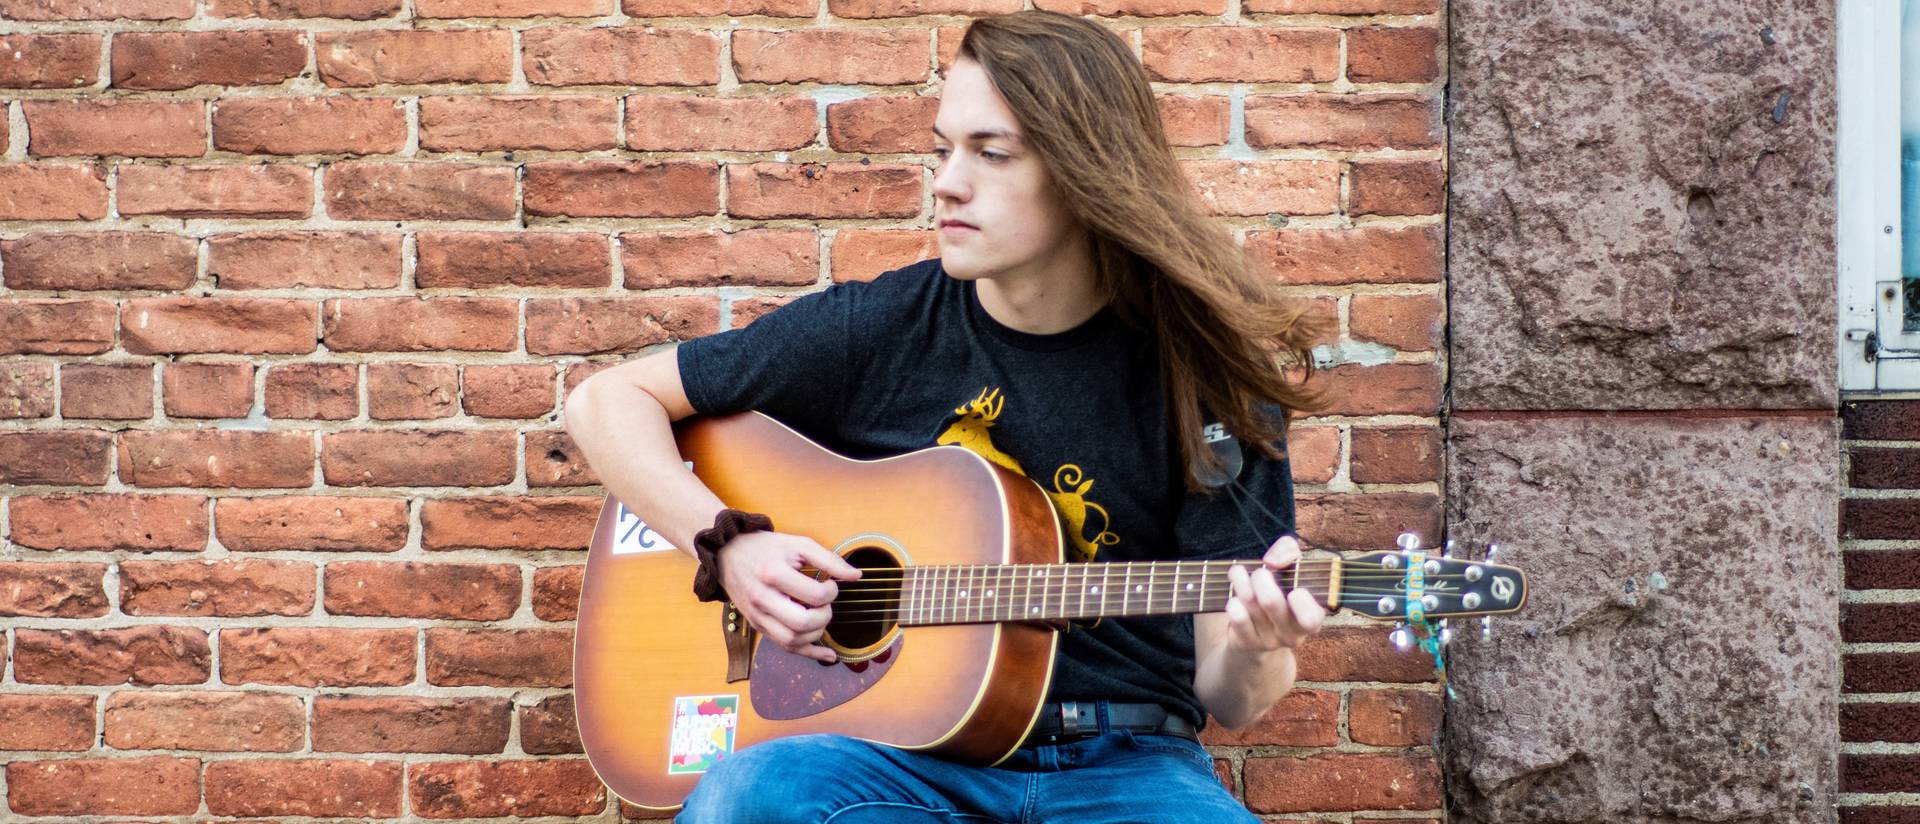 Declan Melchoir and several fellow Blugolds created a virtual concert event to raise awareness of mental illness among students on campus and resources available to support them.